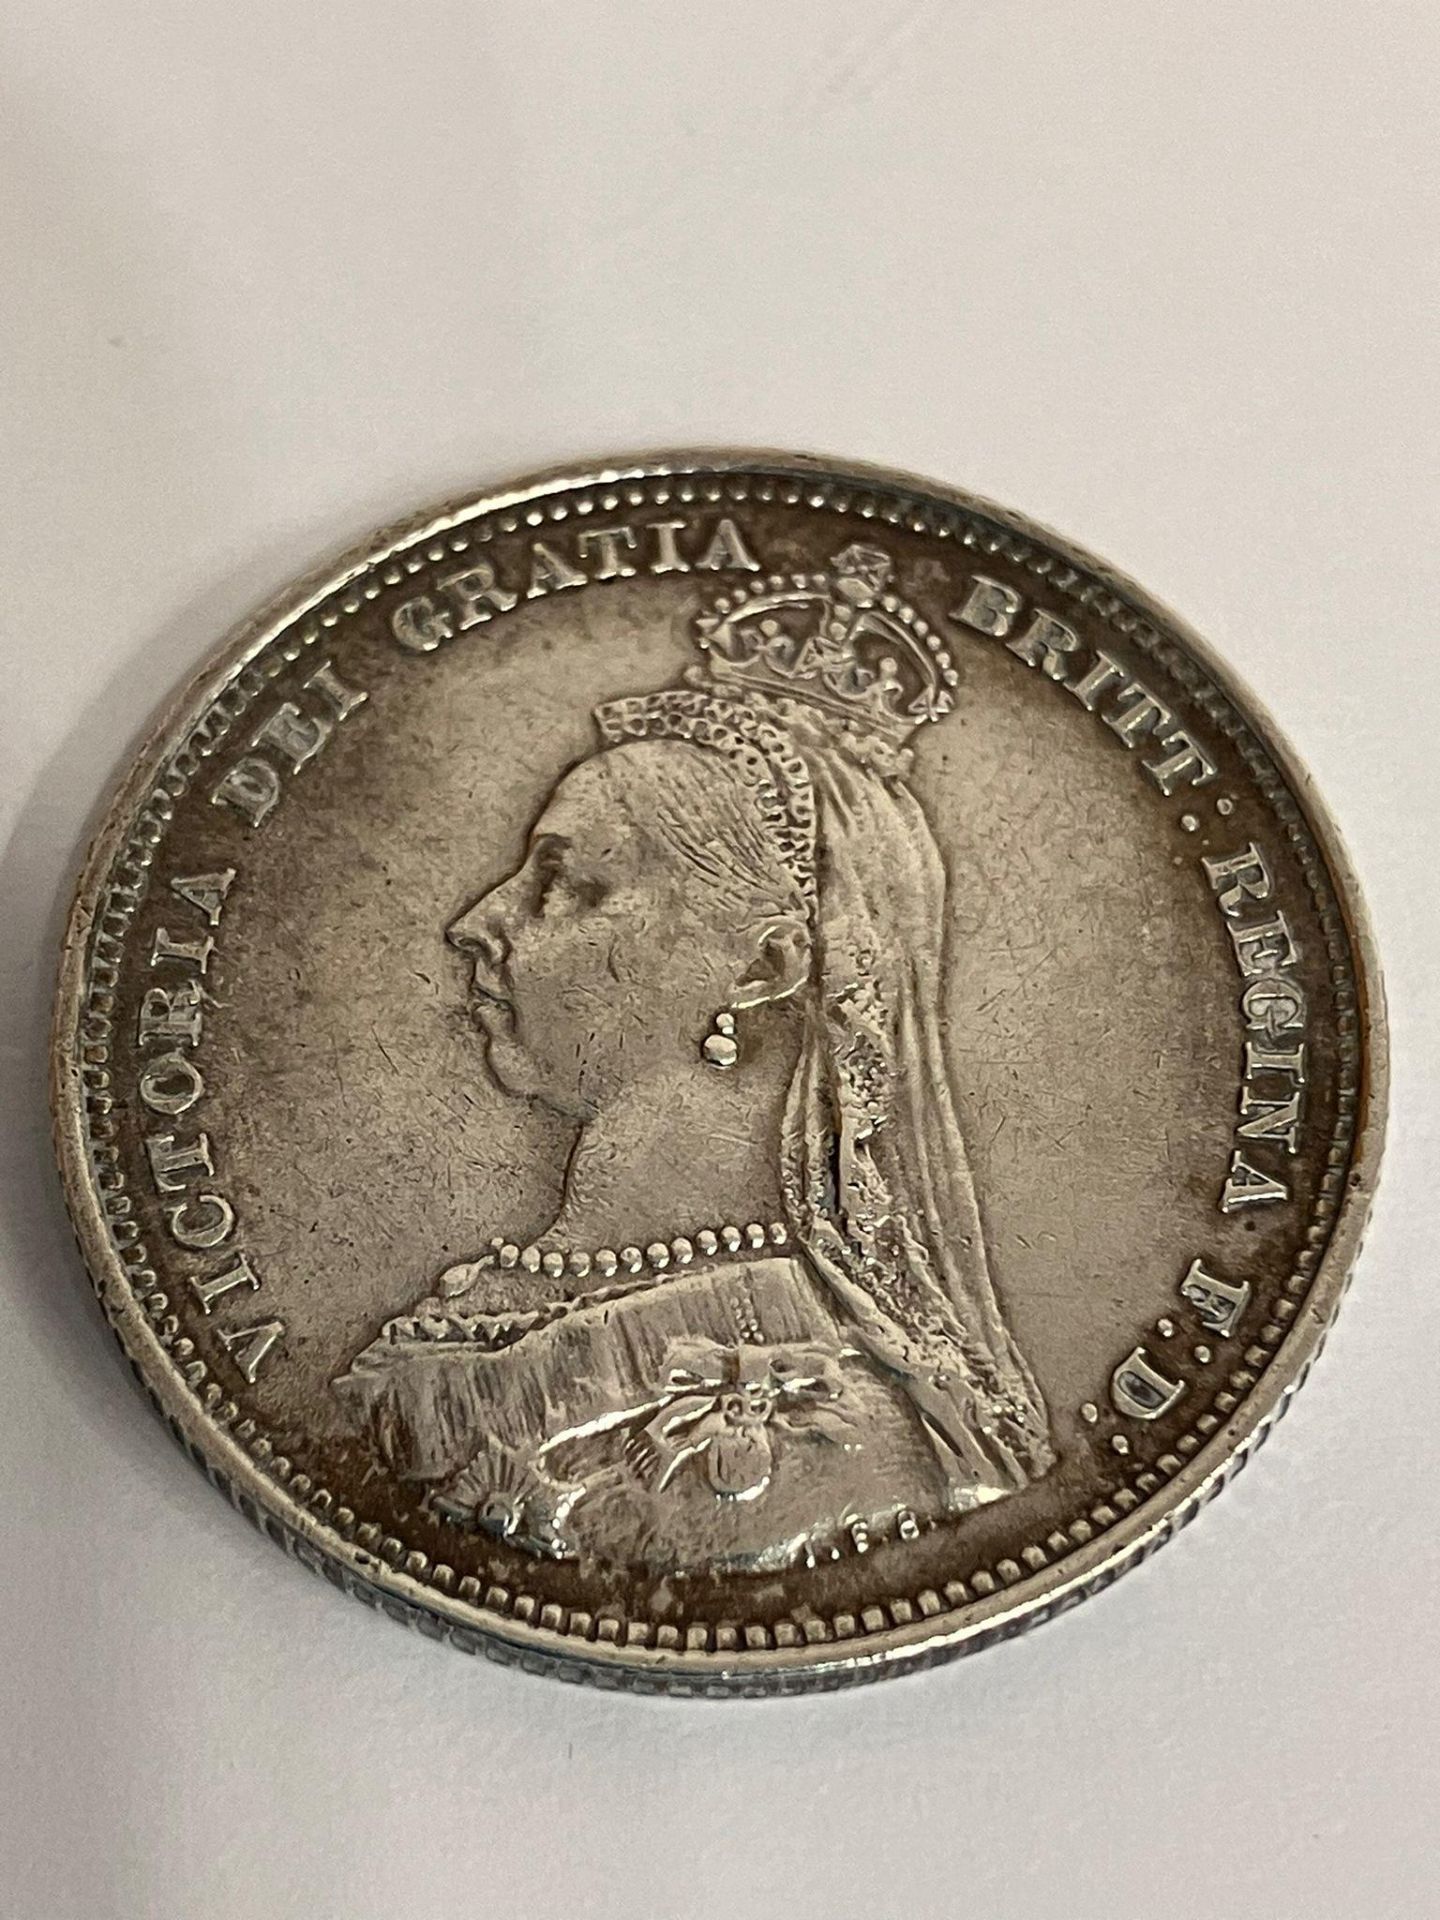 1887 SILVER SHILLING in very/extra fine condition. Queen Victoria Golden Jubilee Mintage. Bold and